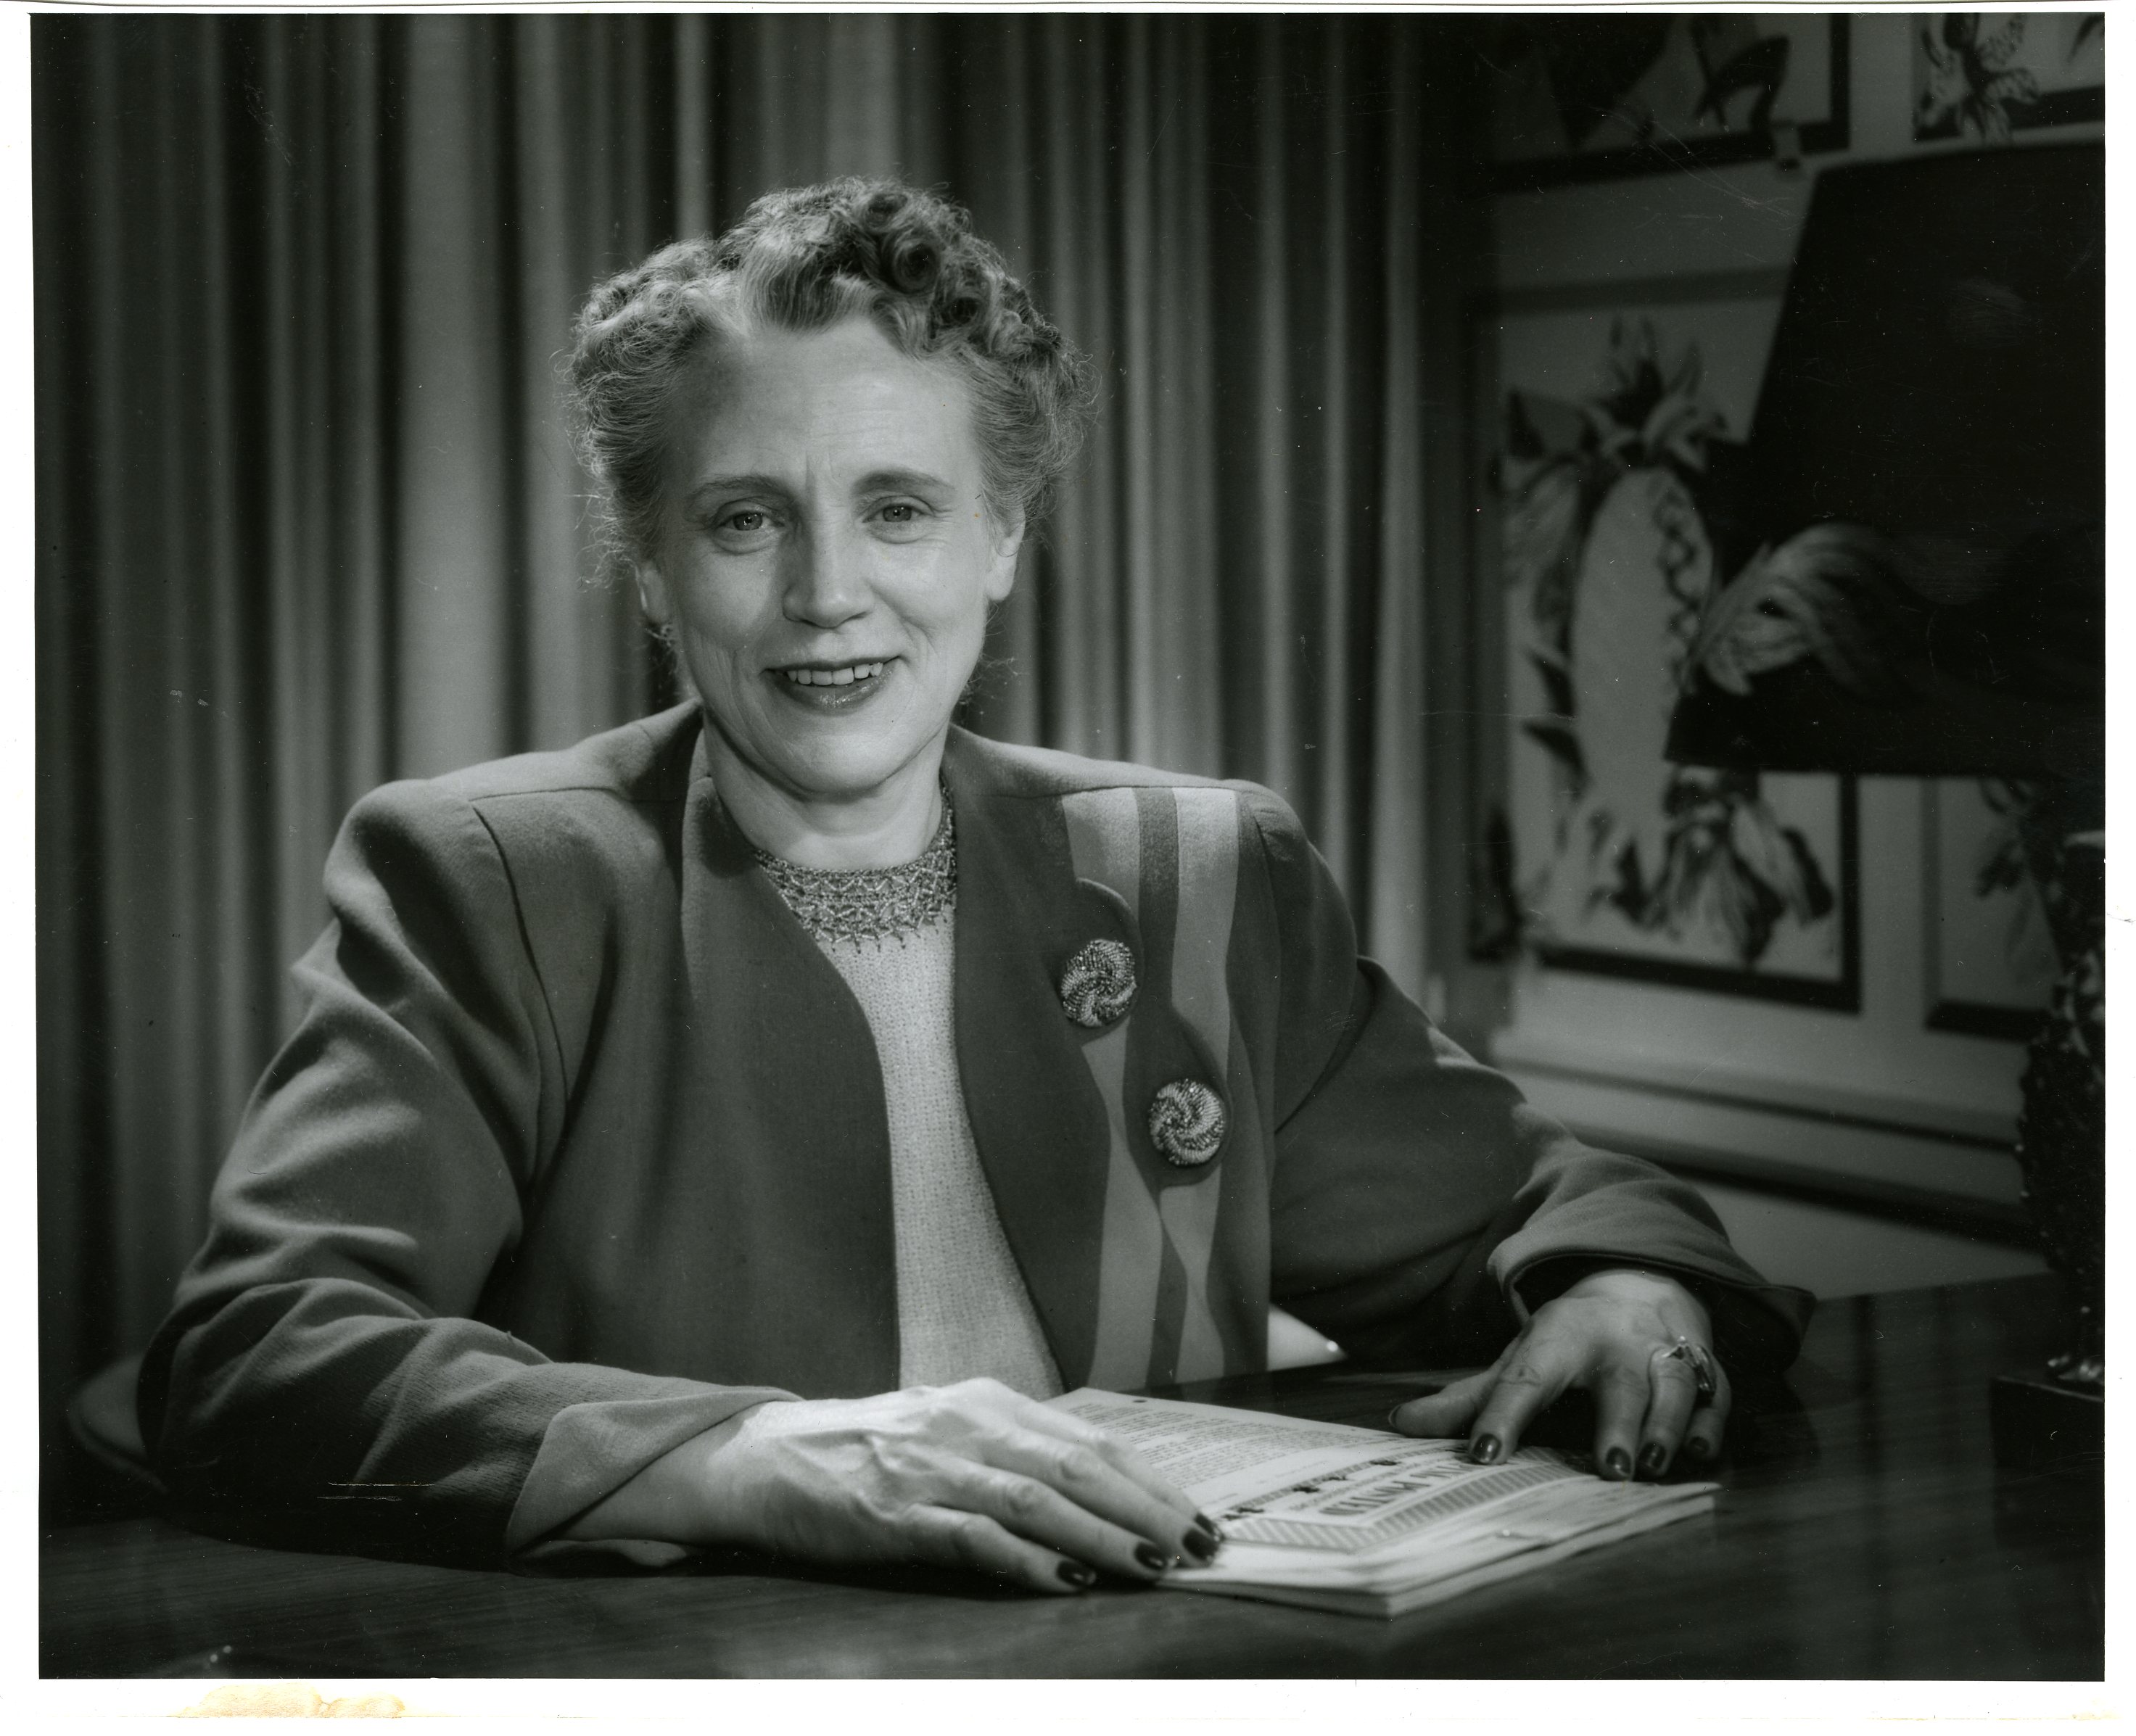 Janette Kelley at her desk in the 1950s